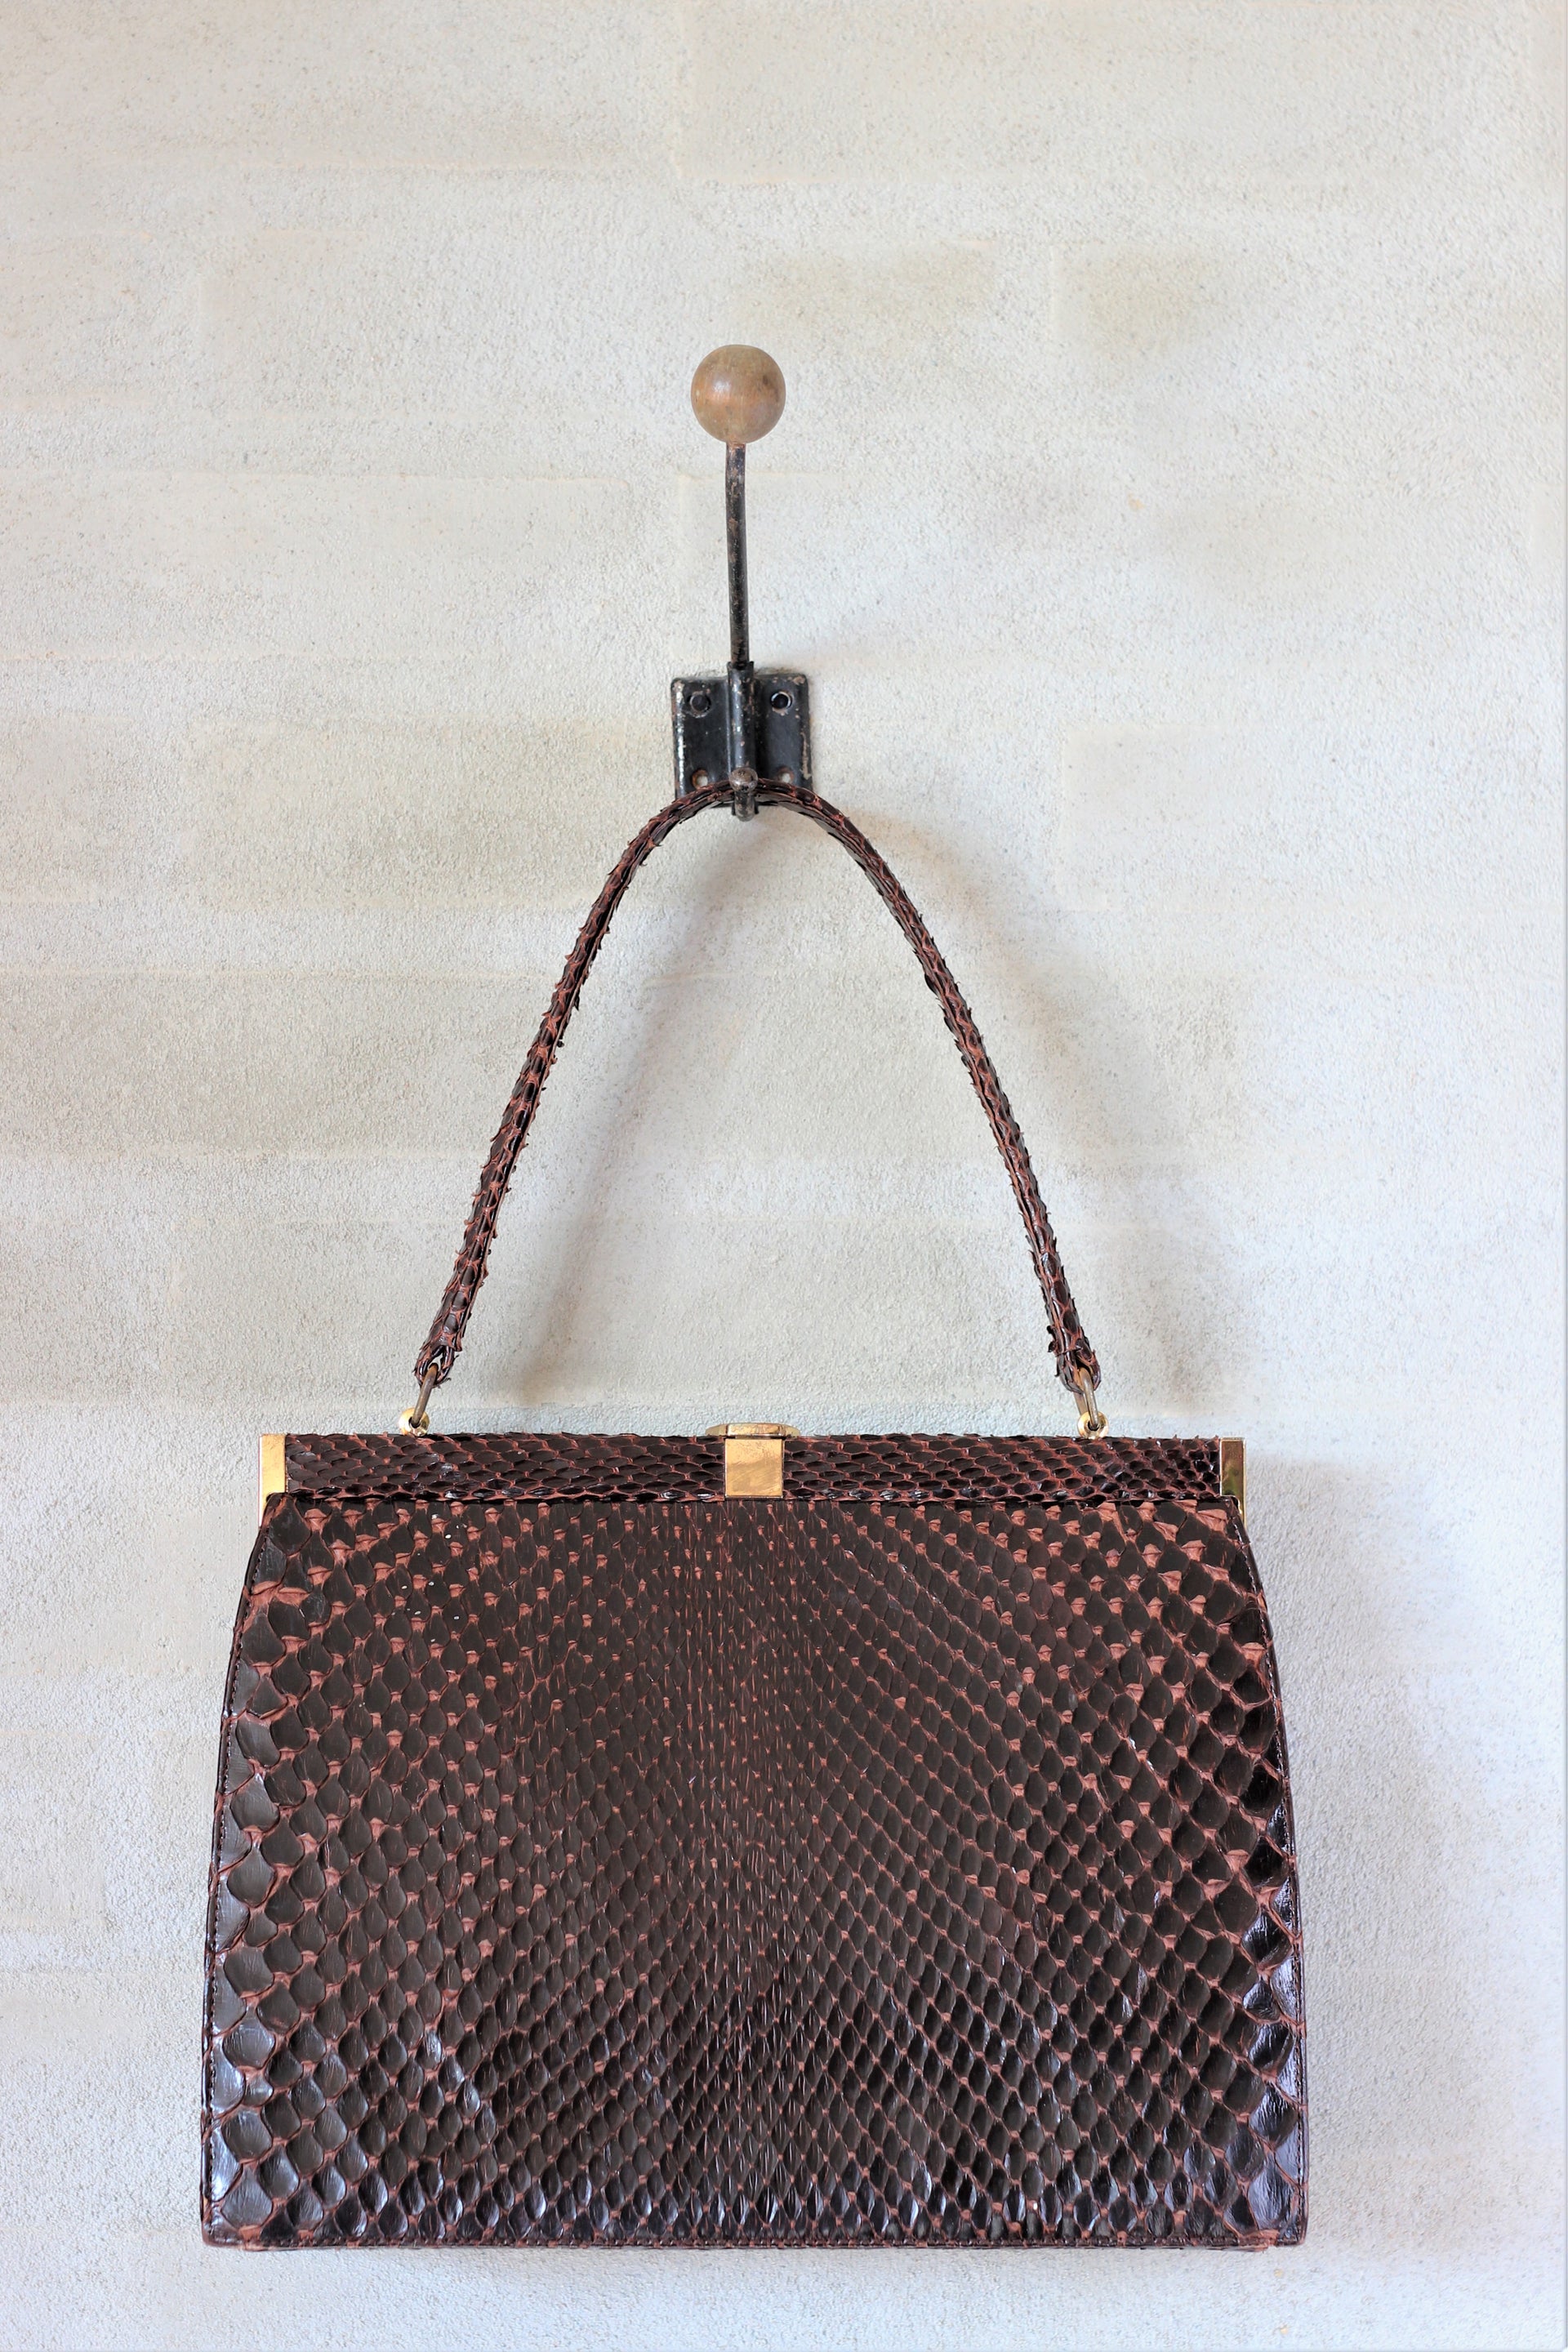 1960s Leather Top Handle Bag with Golden Closure